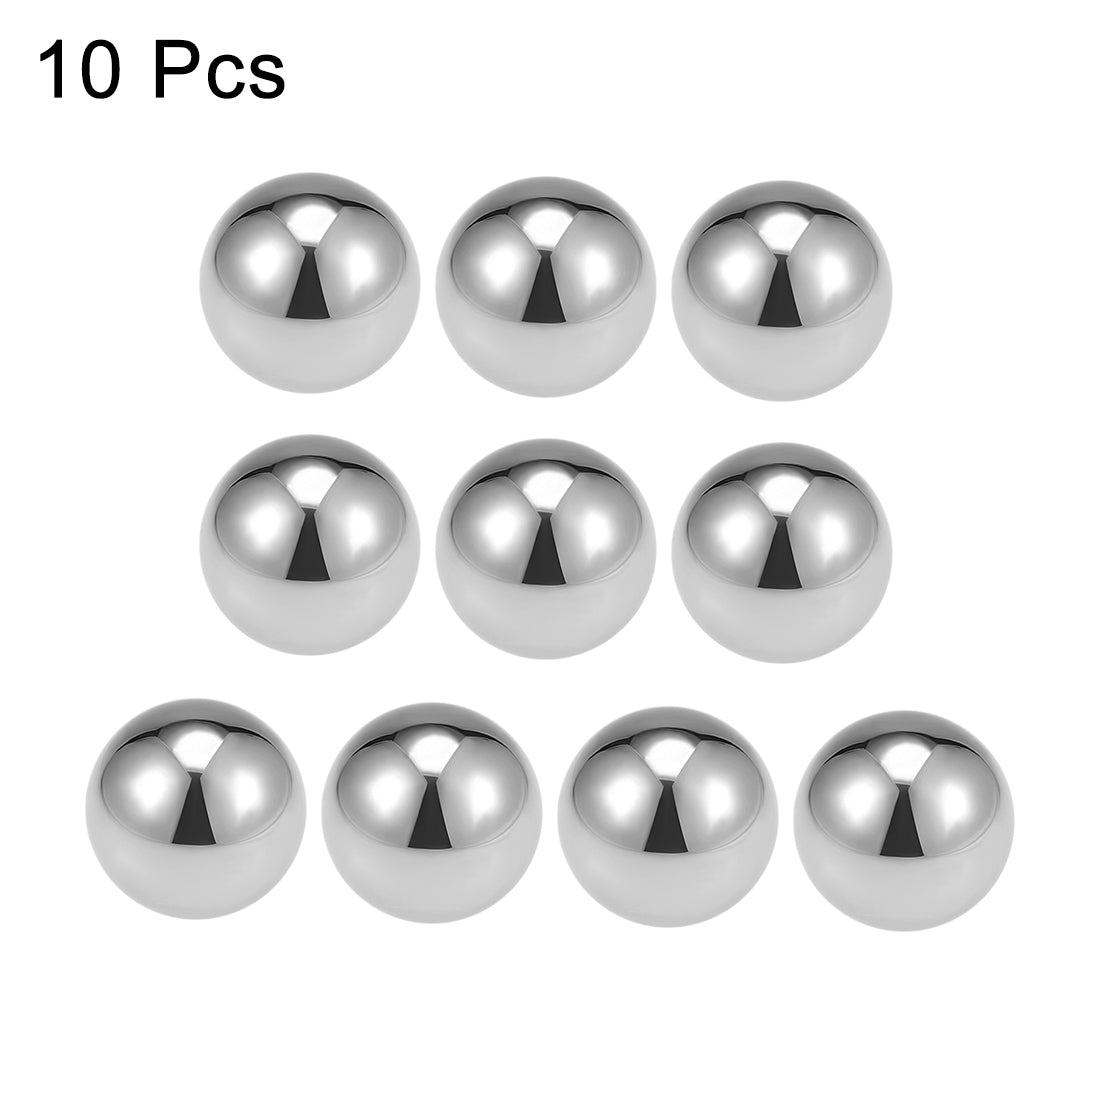 uxcell Uxcell Precision Balls 7/8" Solid Chrome Steel G25 for Ball Bearing Wheel 10pcs